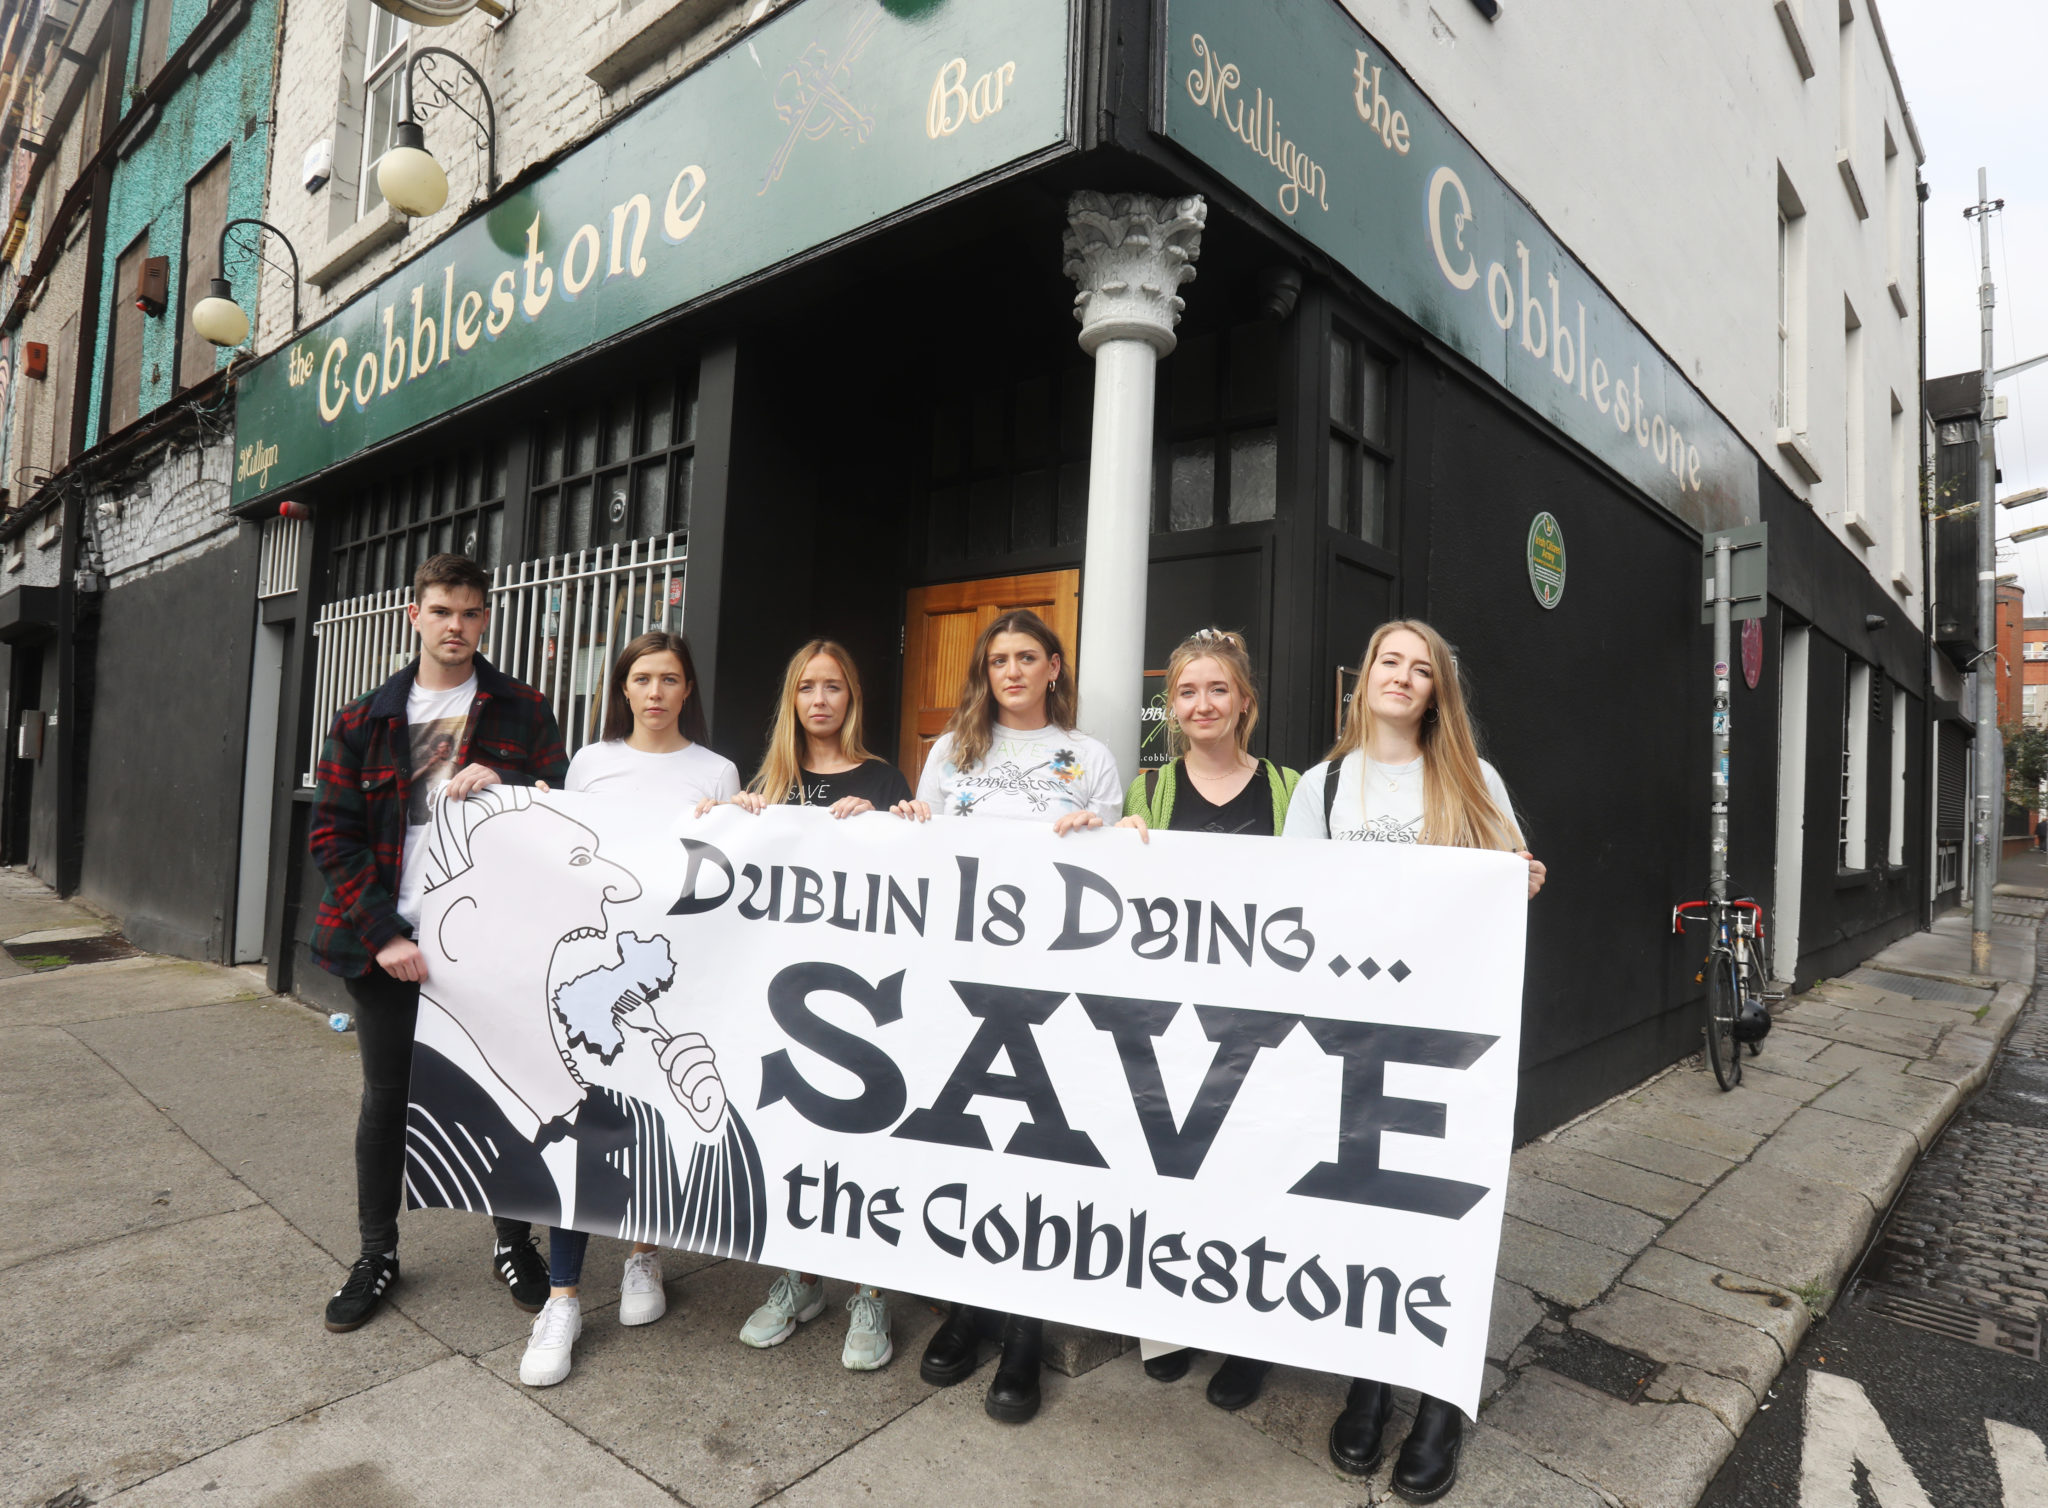 Protesters outside the Cobblestone pub in Dublin, with a sign calling for the popular pub to be saved